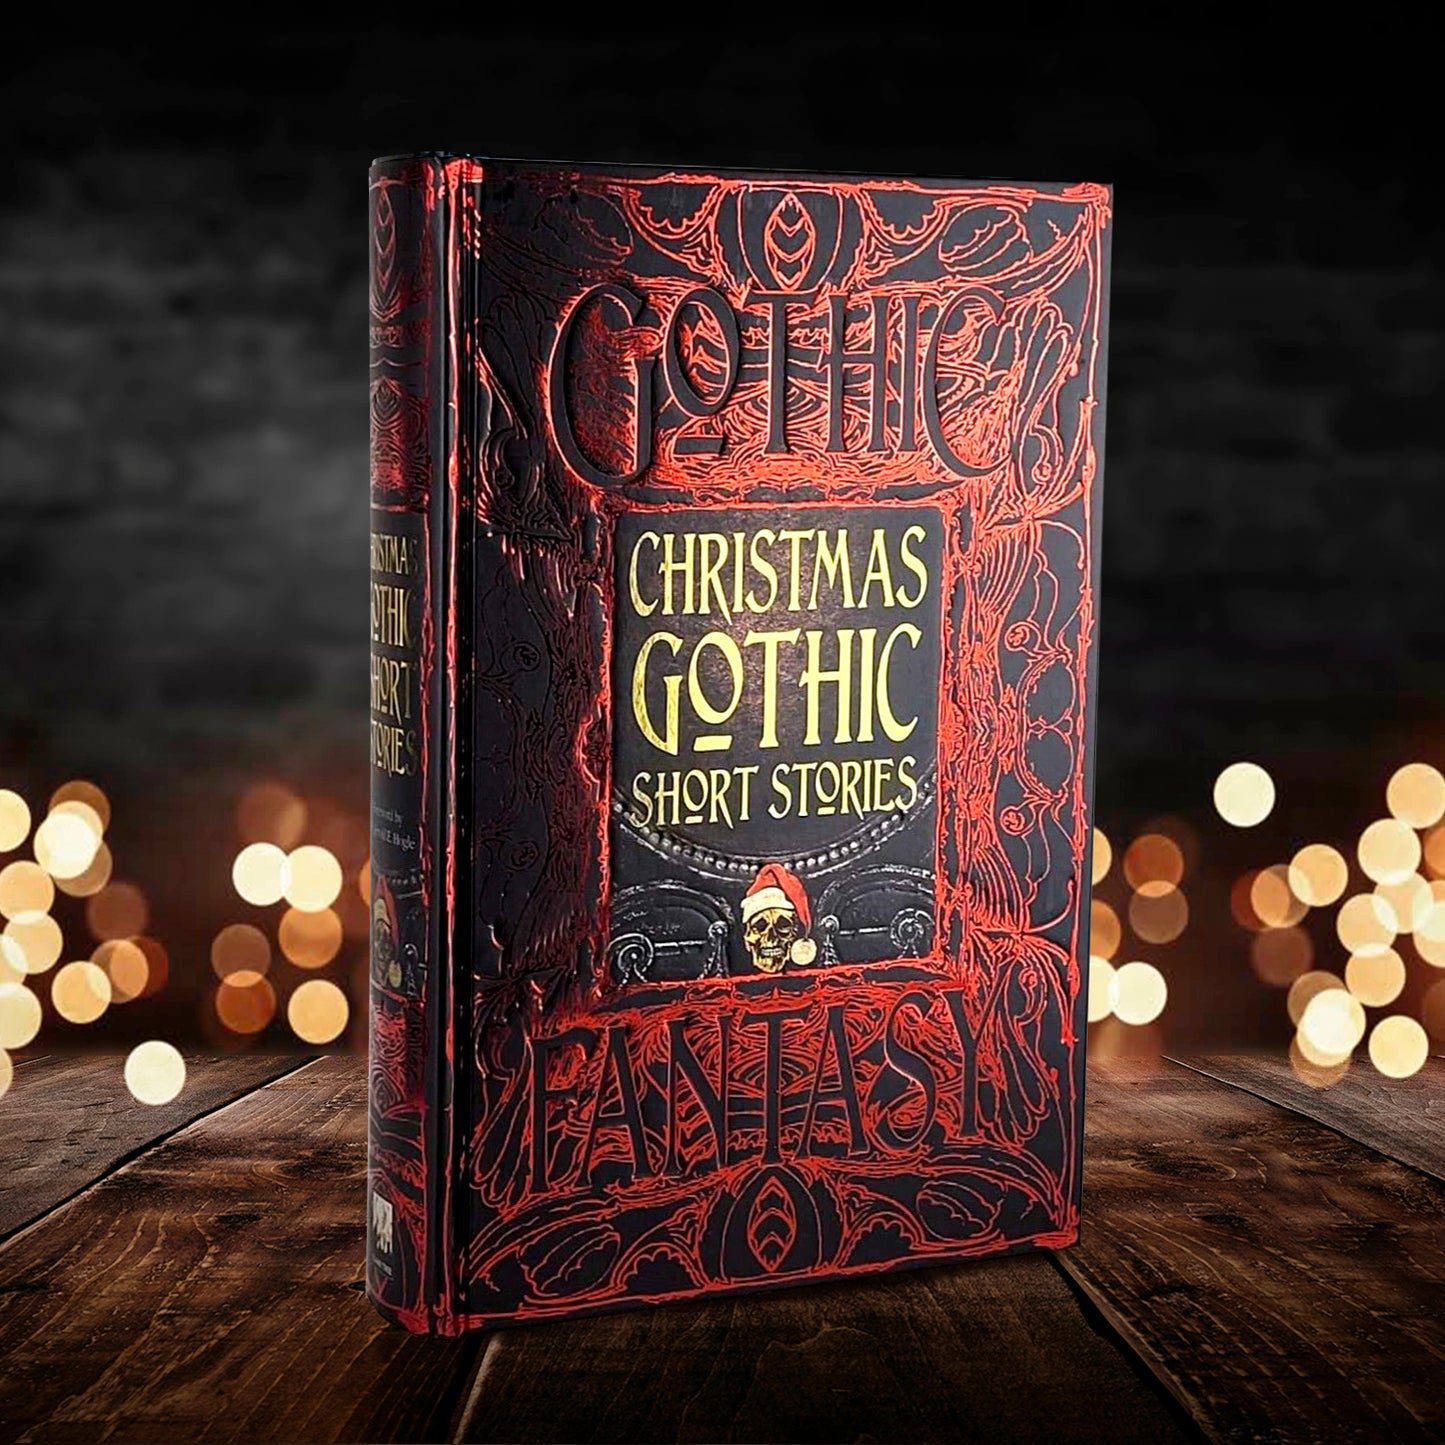 A red and black book on a wooden floor. The background of the cover depicts a gothic floral pattern in red against black, with the words gothic fantasy spelled out in the pattern. In the center is a gray stone tablet, with a skull at the bottom wearing a Santa Claus hat. Yellow text above the skull says Christmas Gothic Short Stories. Behind the book are tiny white lights, against a smoky gray background.